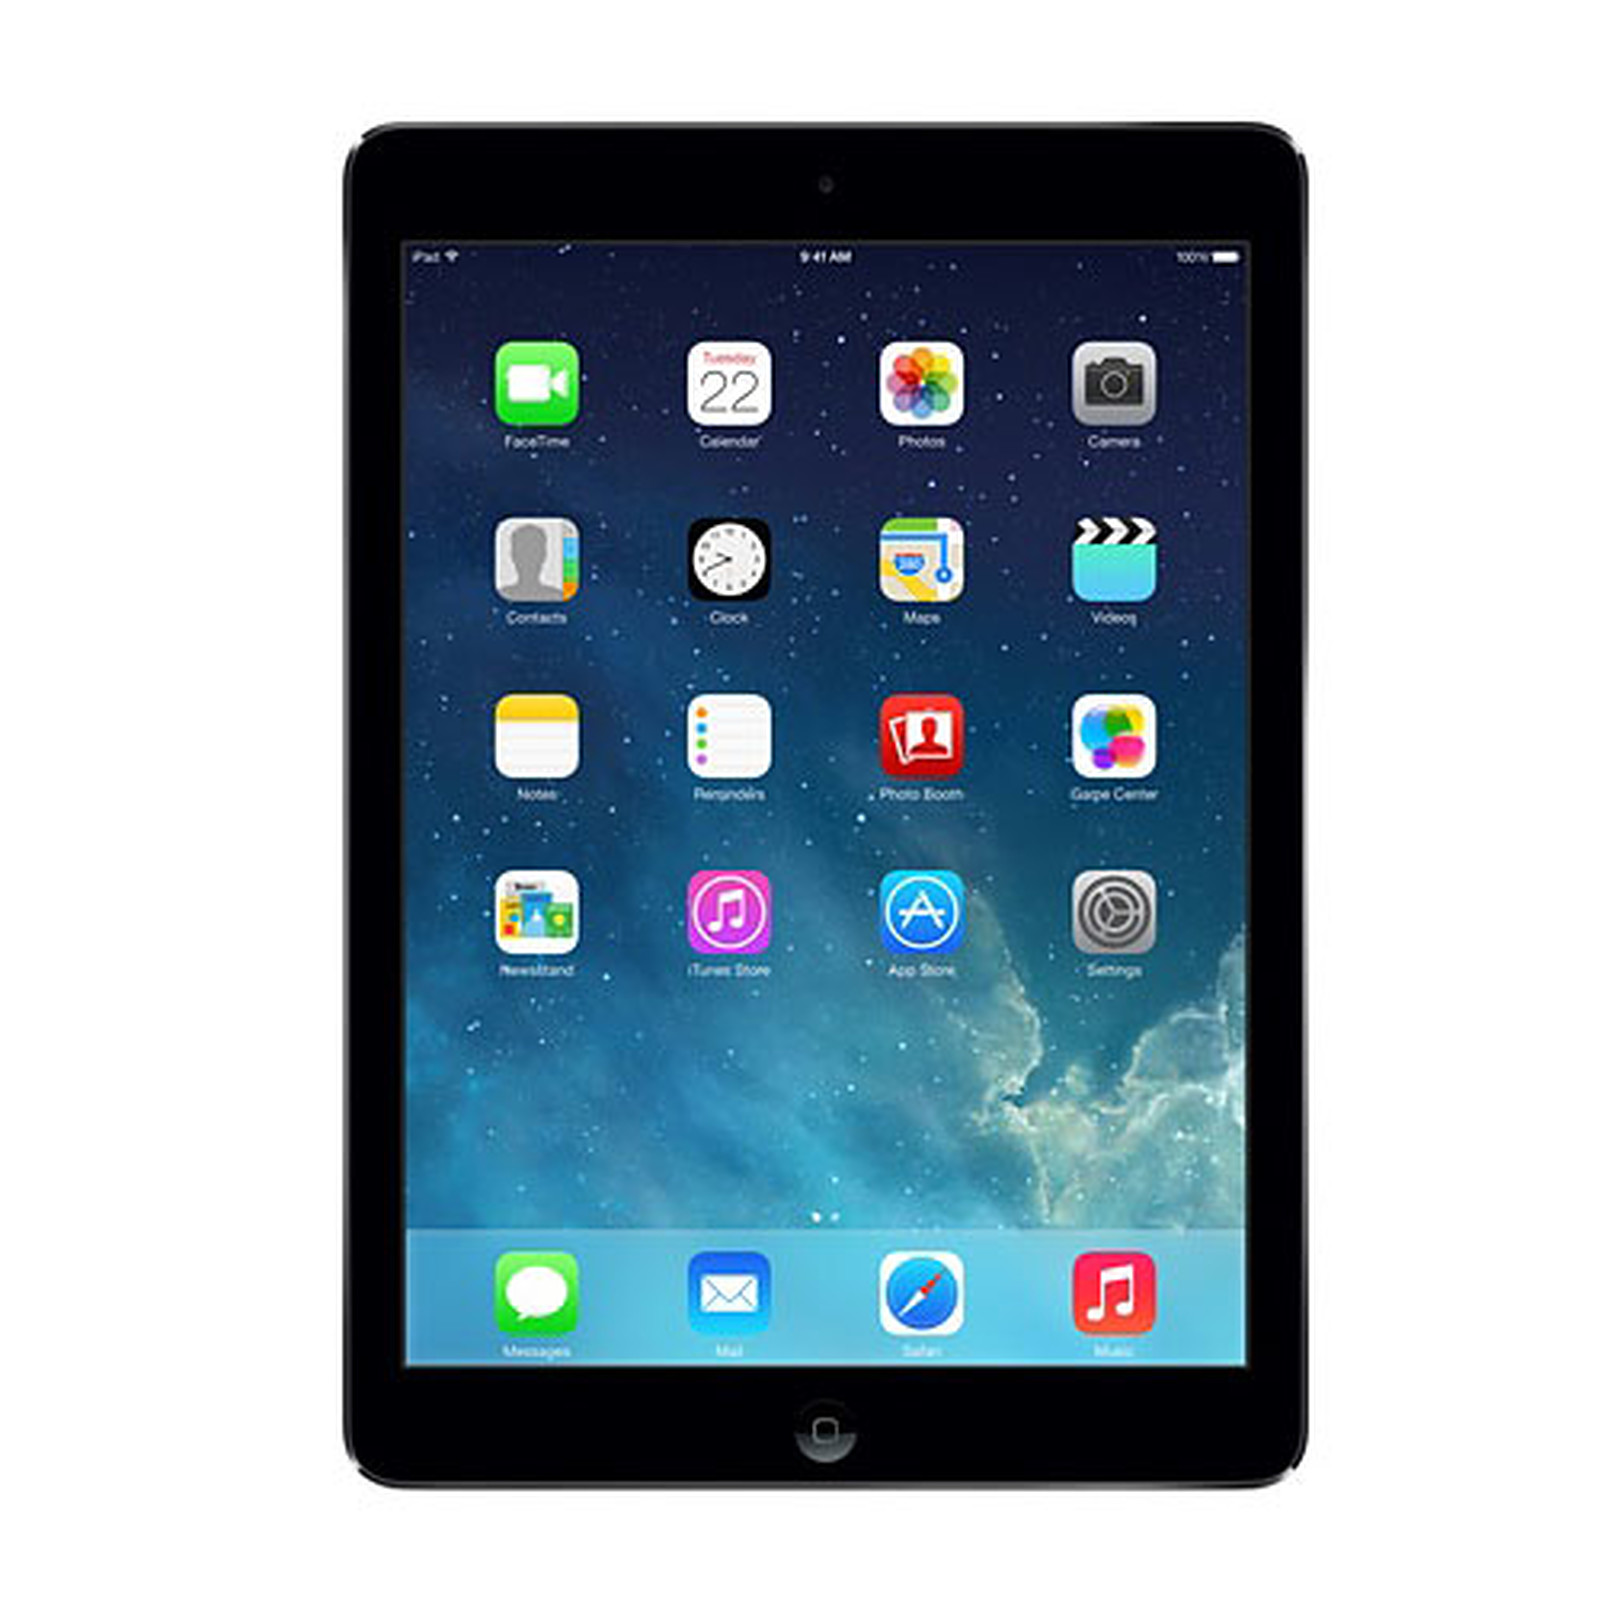 Apple iPad Air 16 Go Wi-Fi Gris Sideral · Reconditionne - Tablette tactile Apple